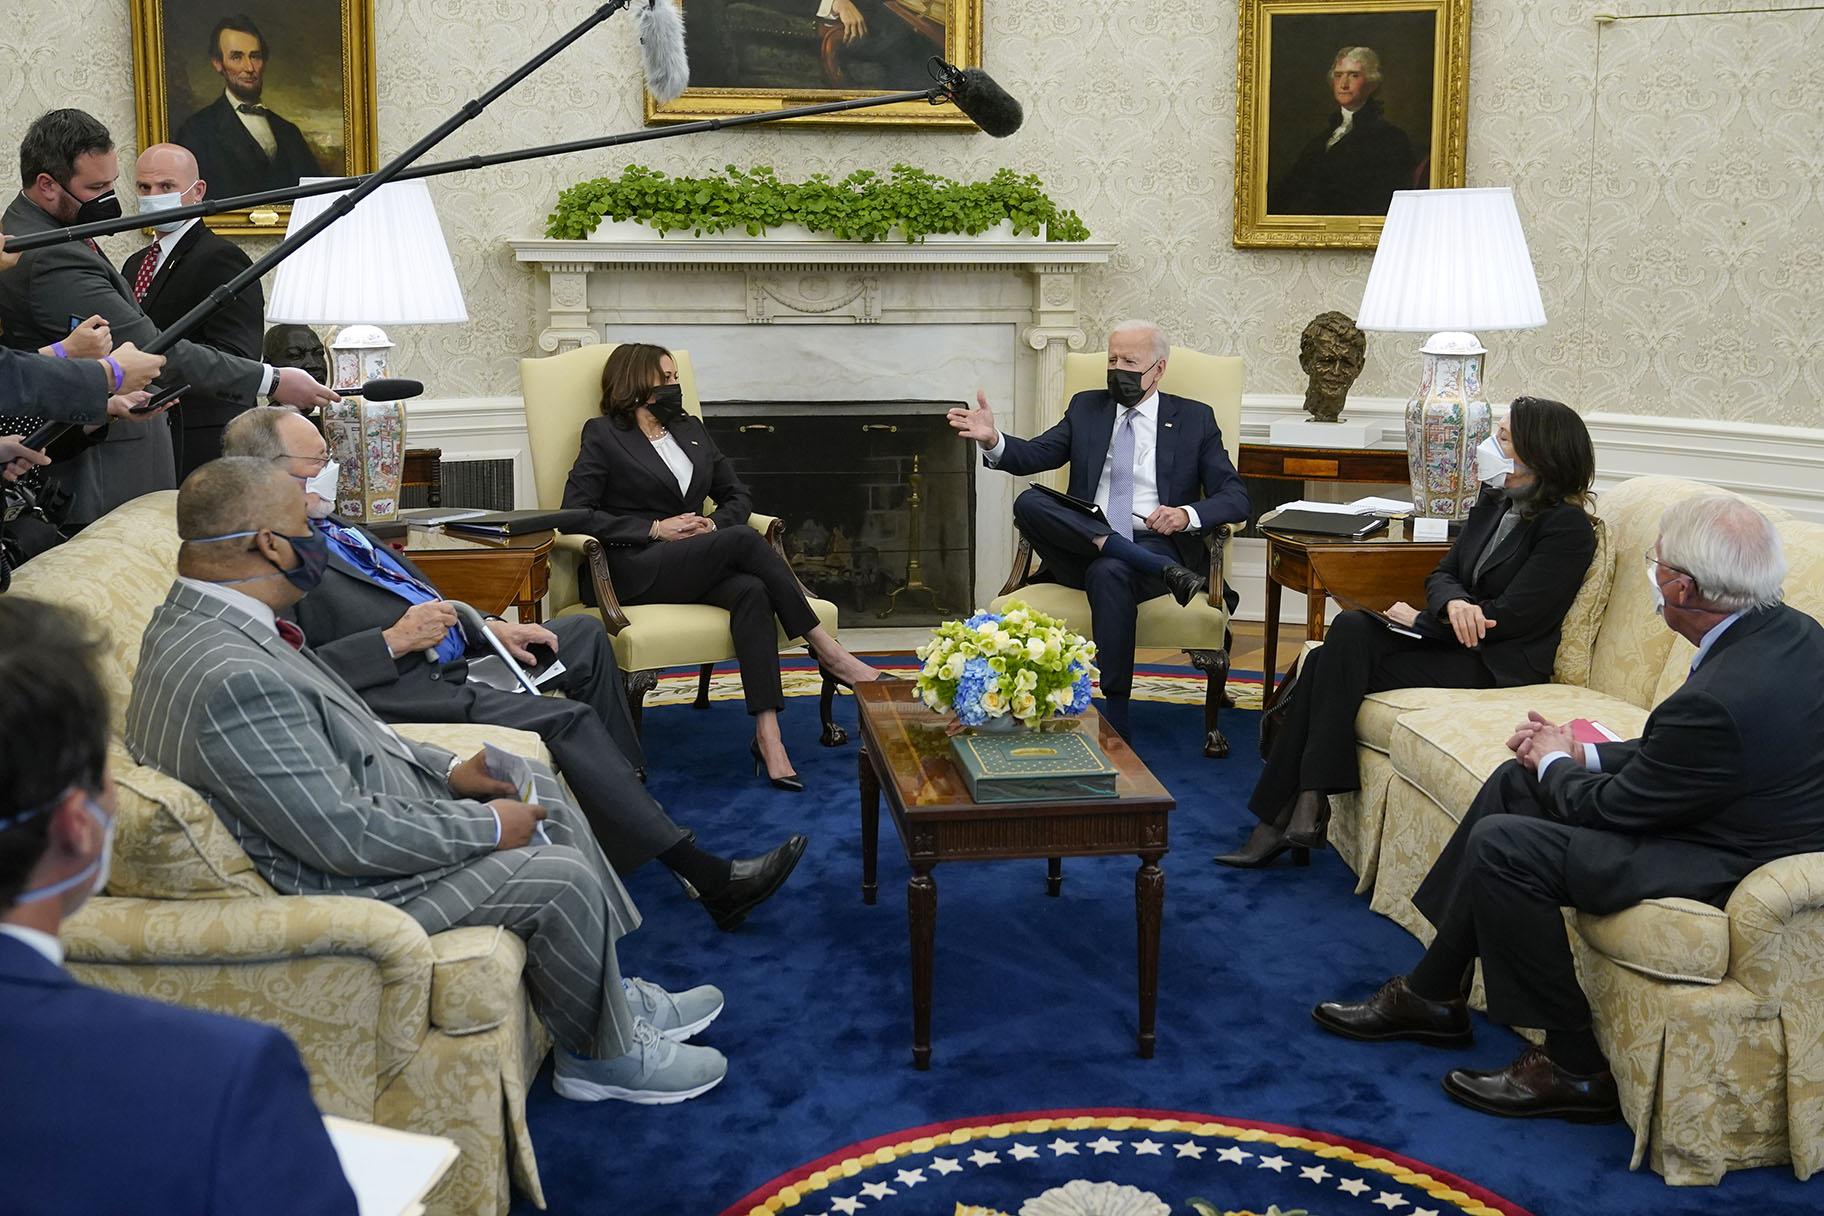 President Joe Biden and Vice President Kamala Harris meet with lawmakers to discuss the American Jobs Plan in the Oval Office of the White House, Monday, April 12, 2021, in Washington. (AP Photo / Patrick Semansky)